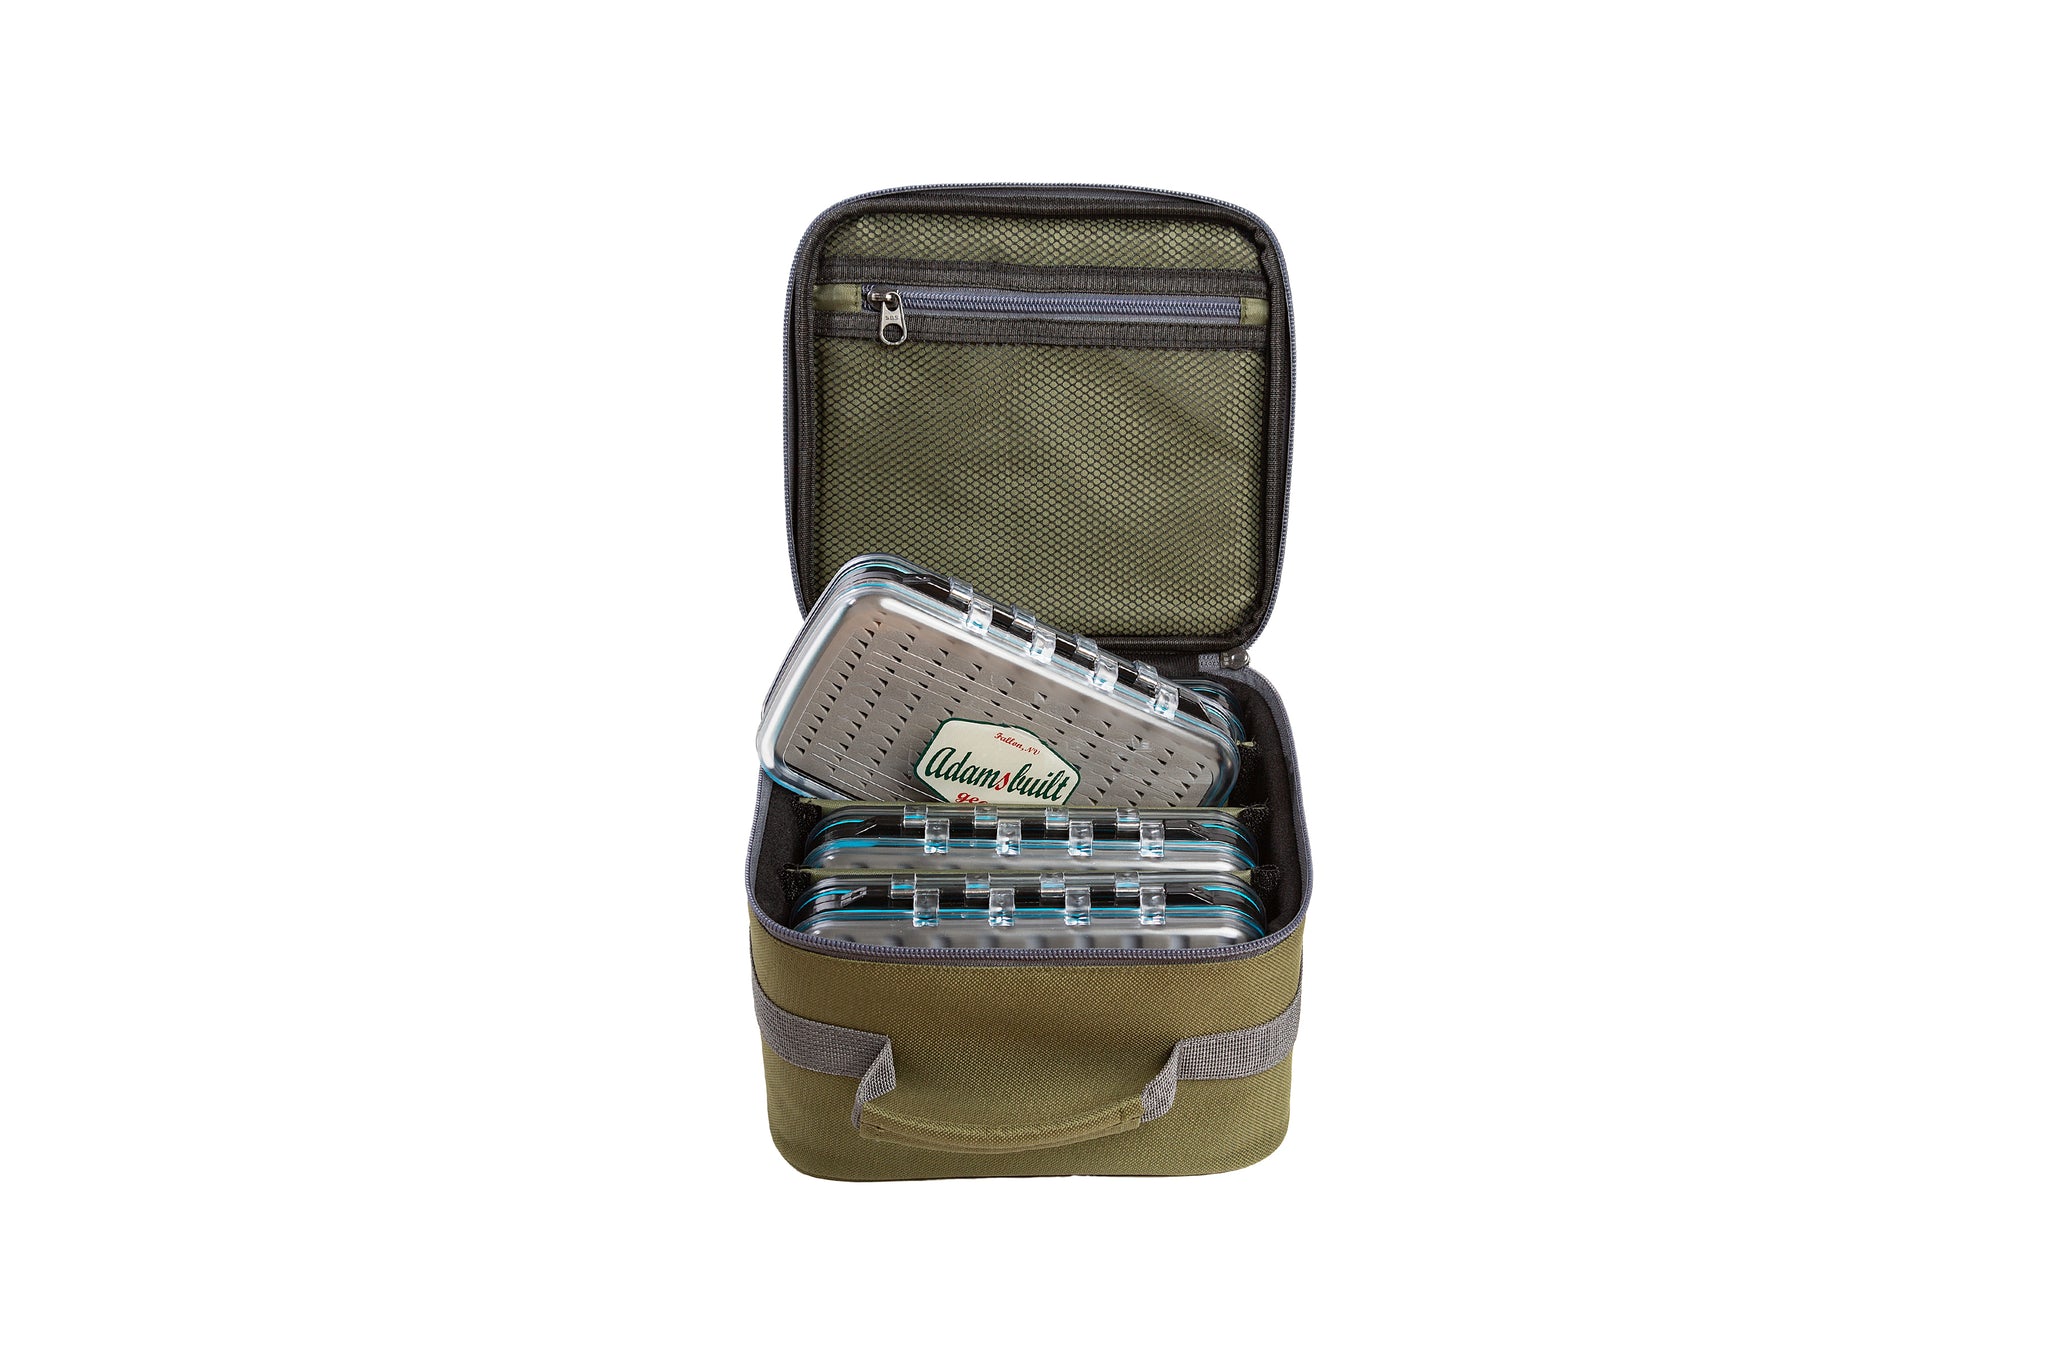 Adamsbuilt Fly Box Carry Case - Large